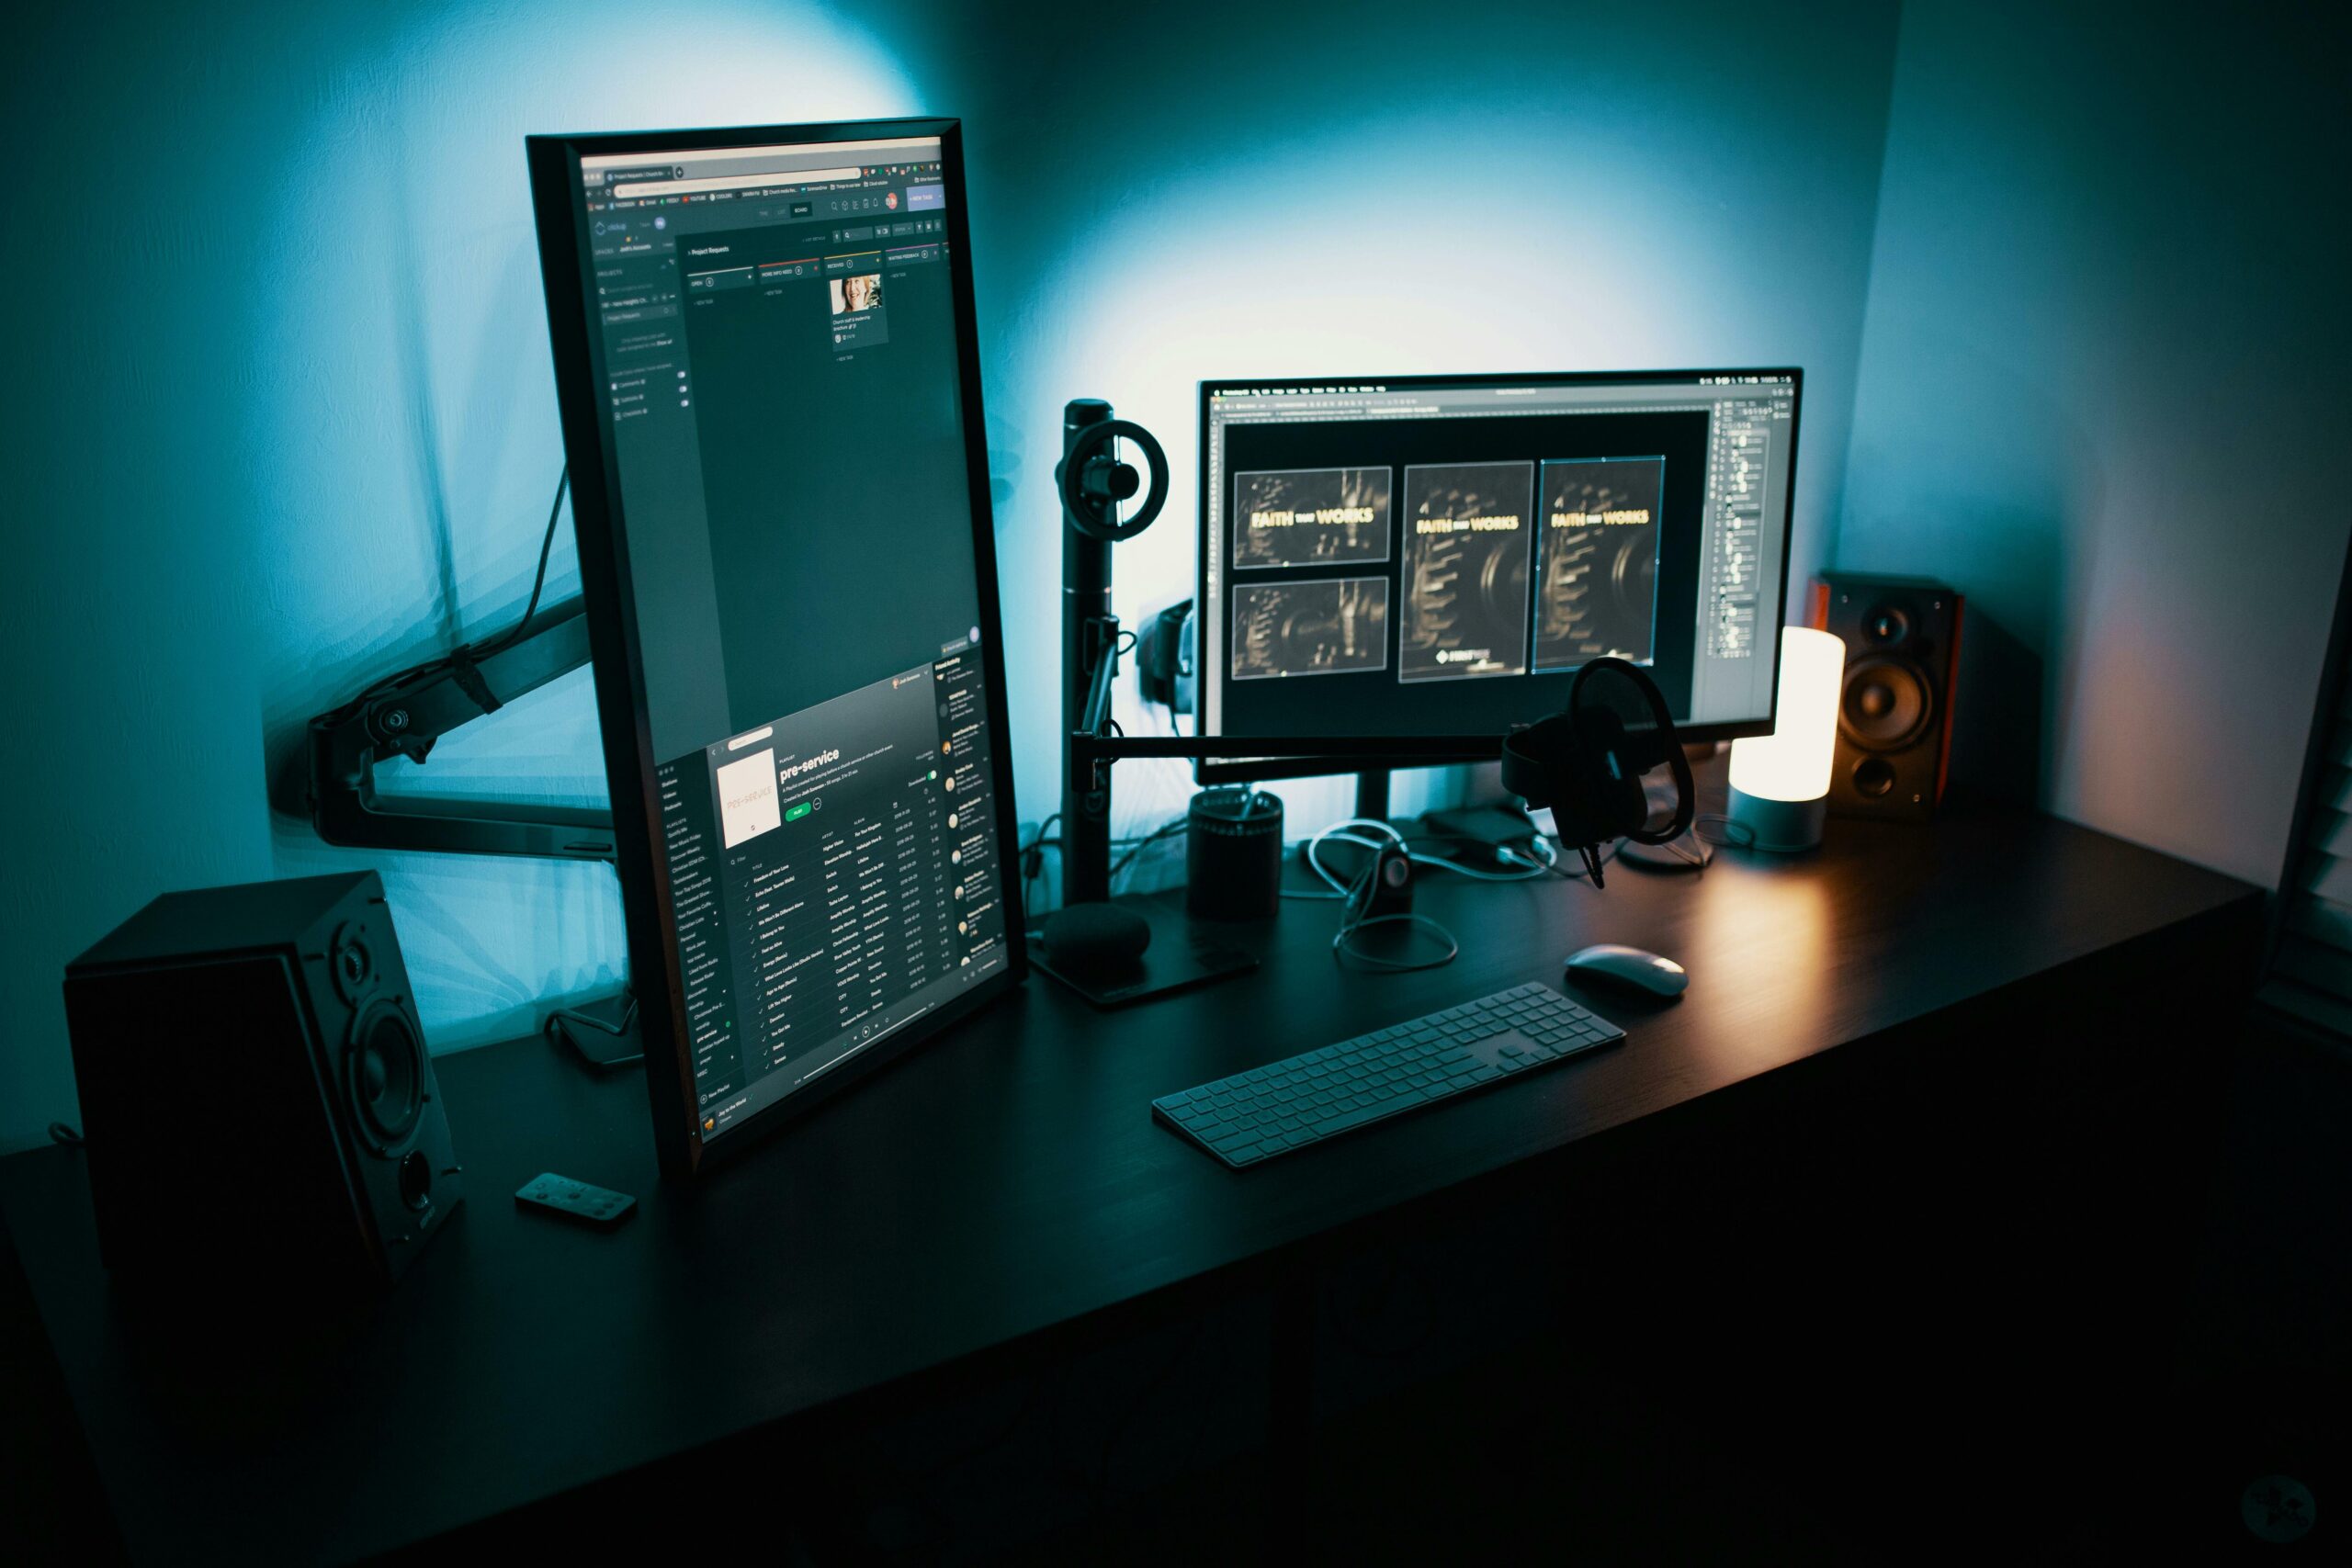 Selection of screens on desk